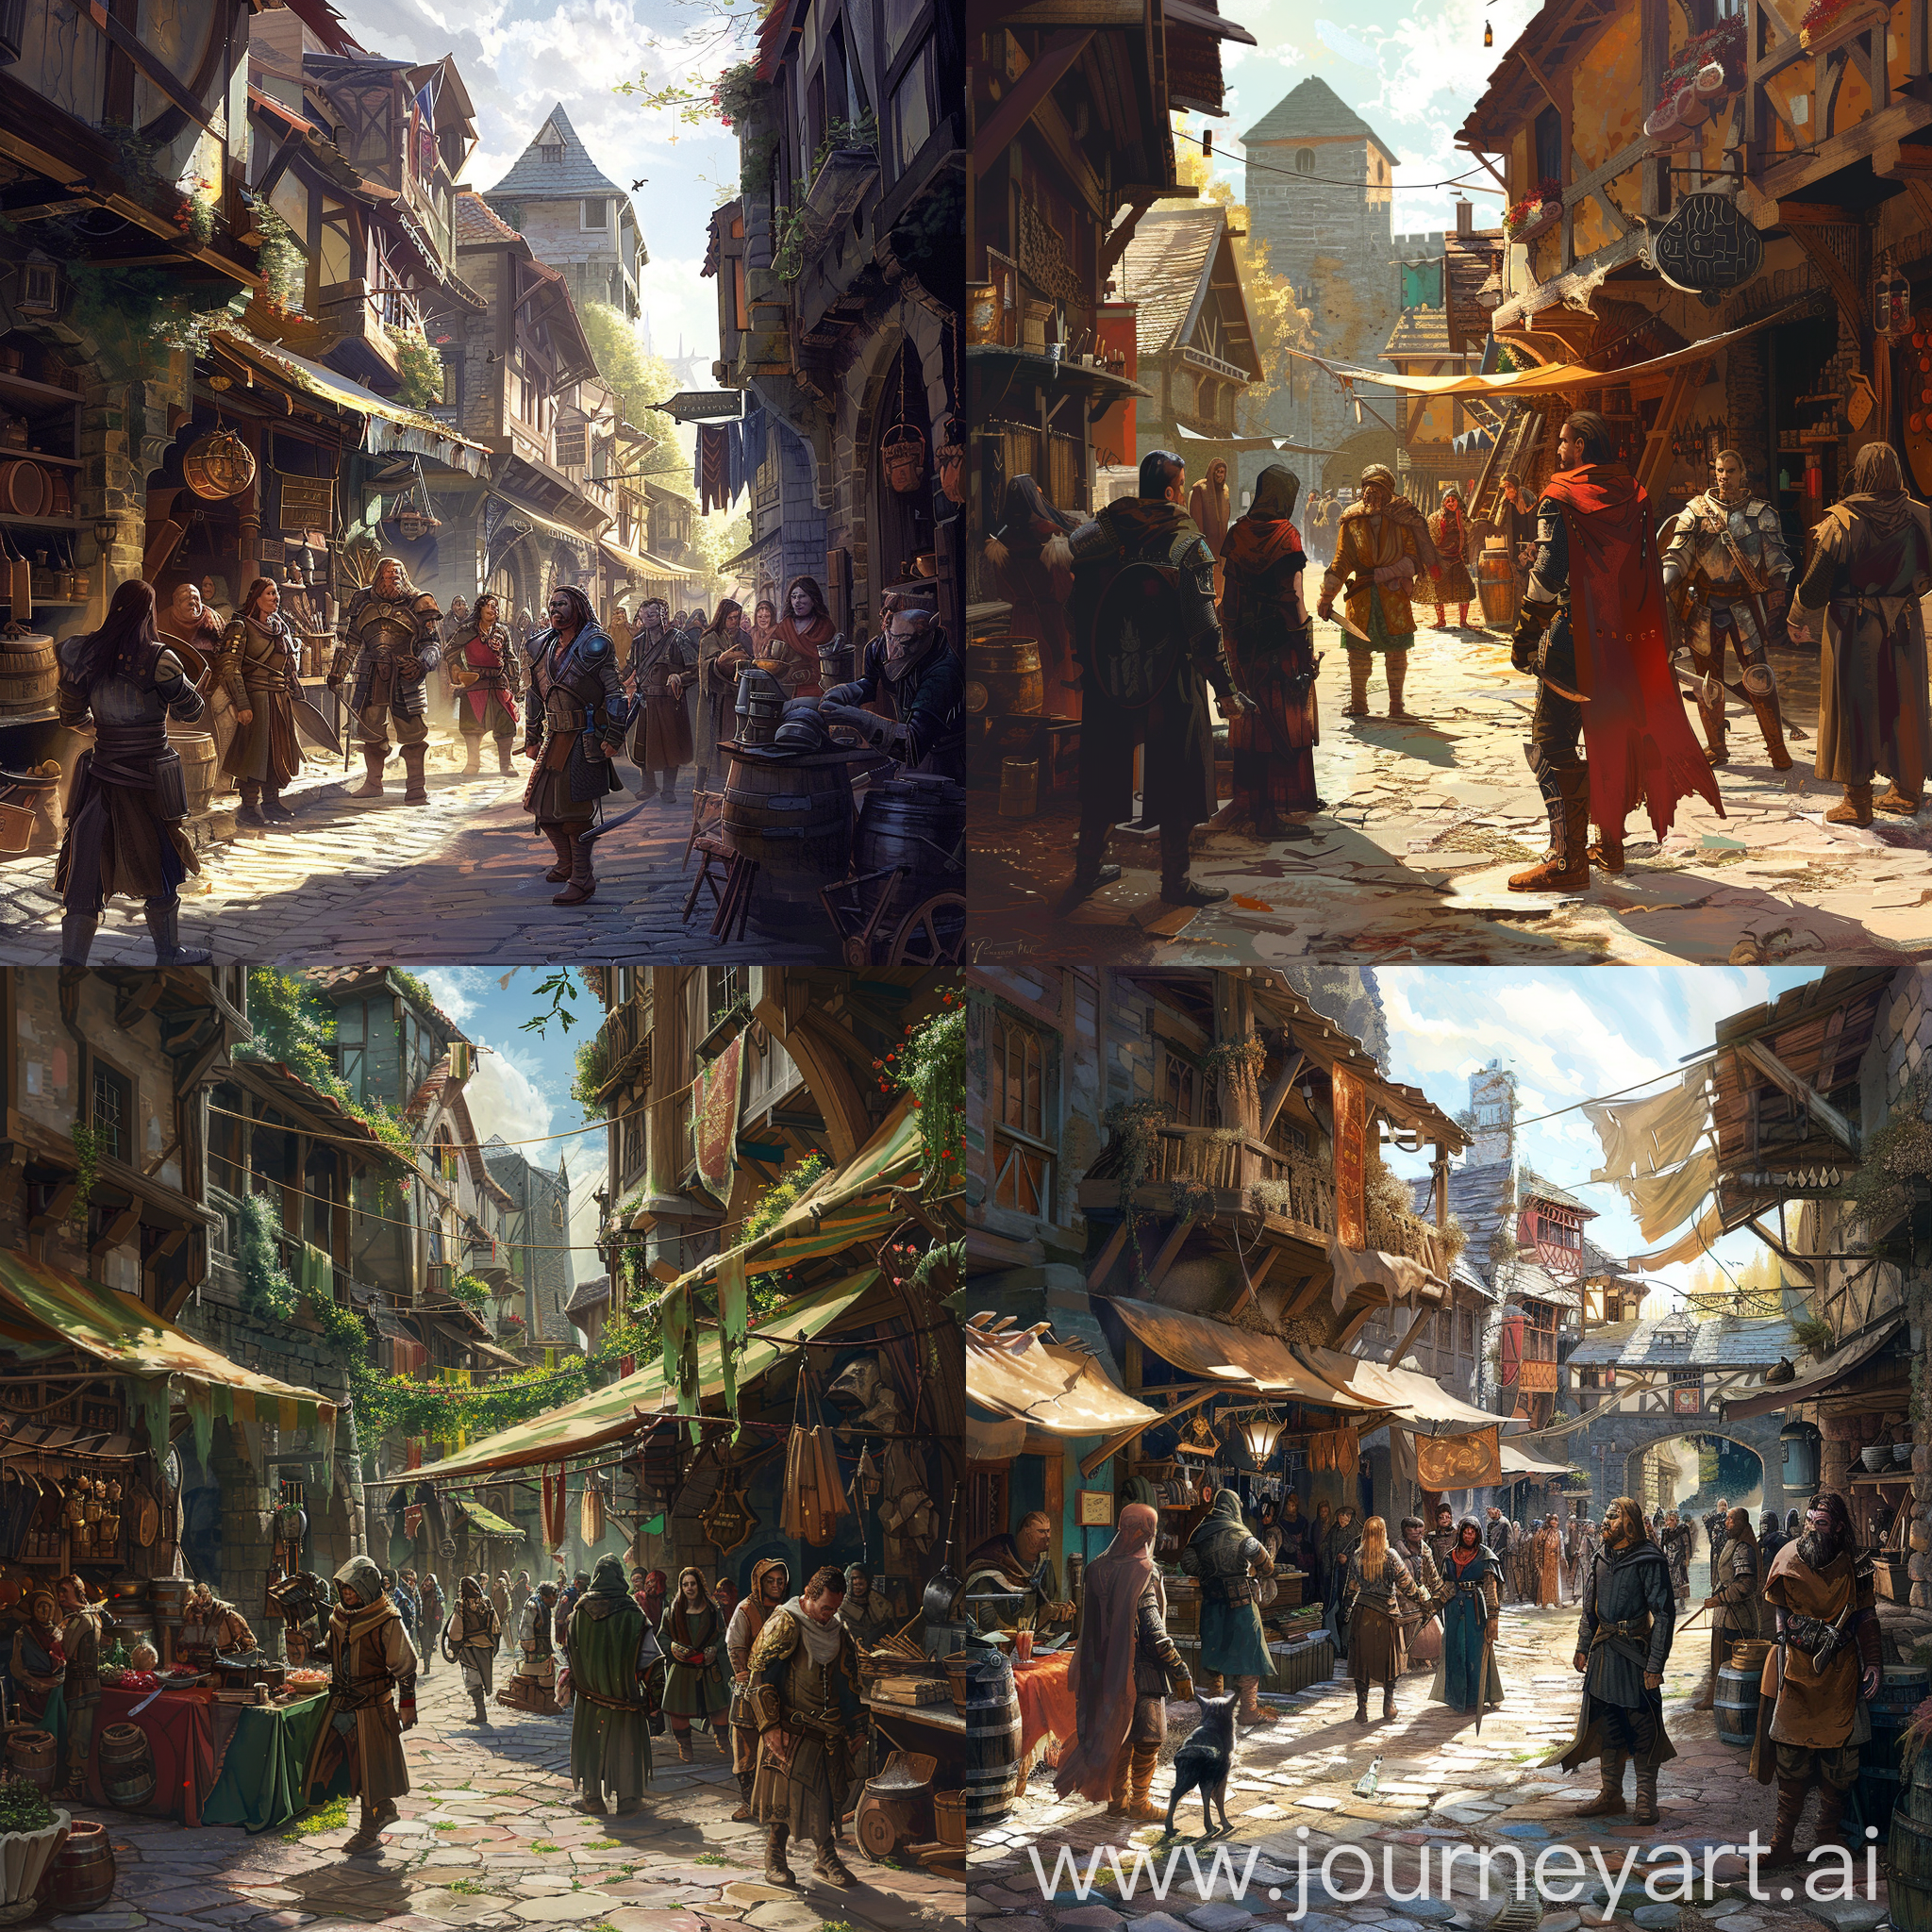 dnd dark fantasy theme,street of a town there are people and merchants,few guardians,workshop and stores.Path of the street is going to up.Sunny background.